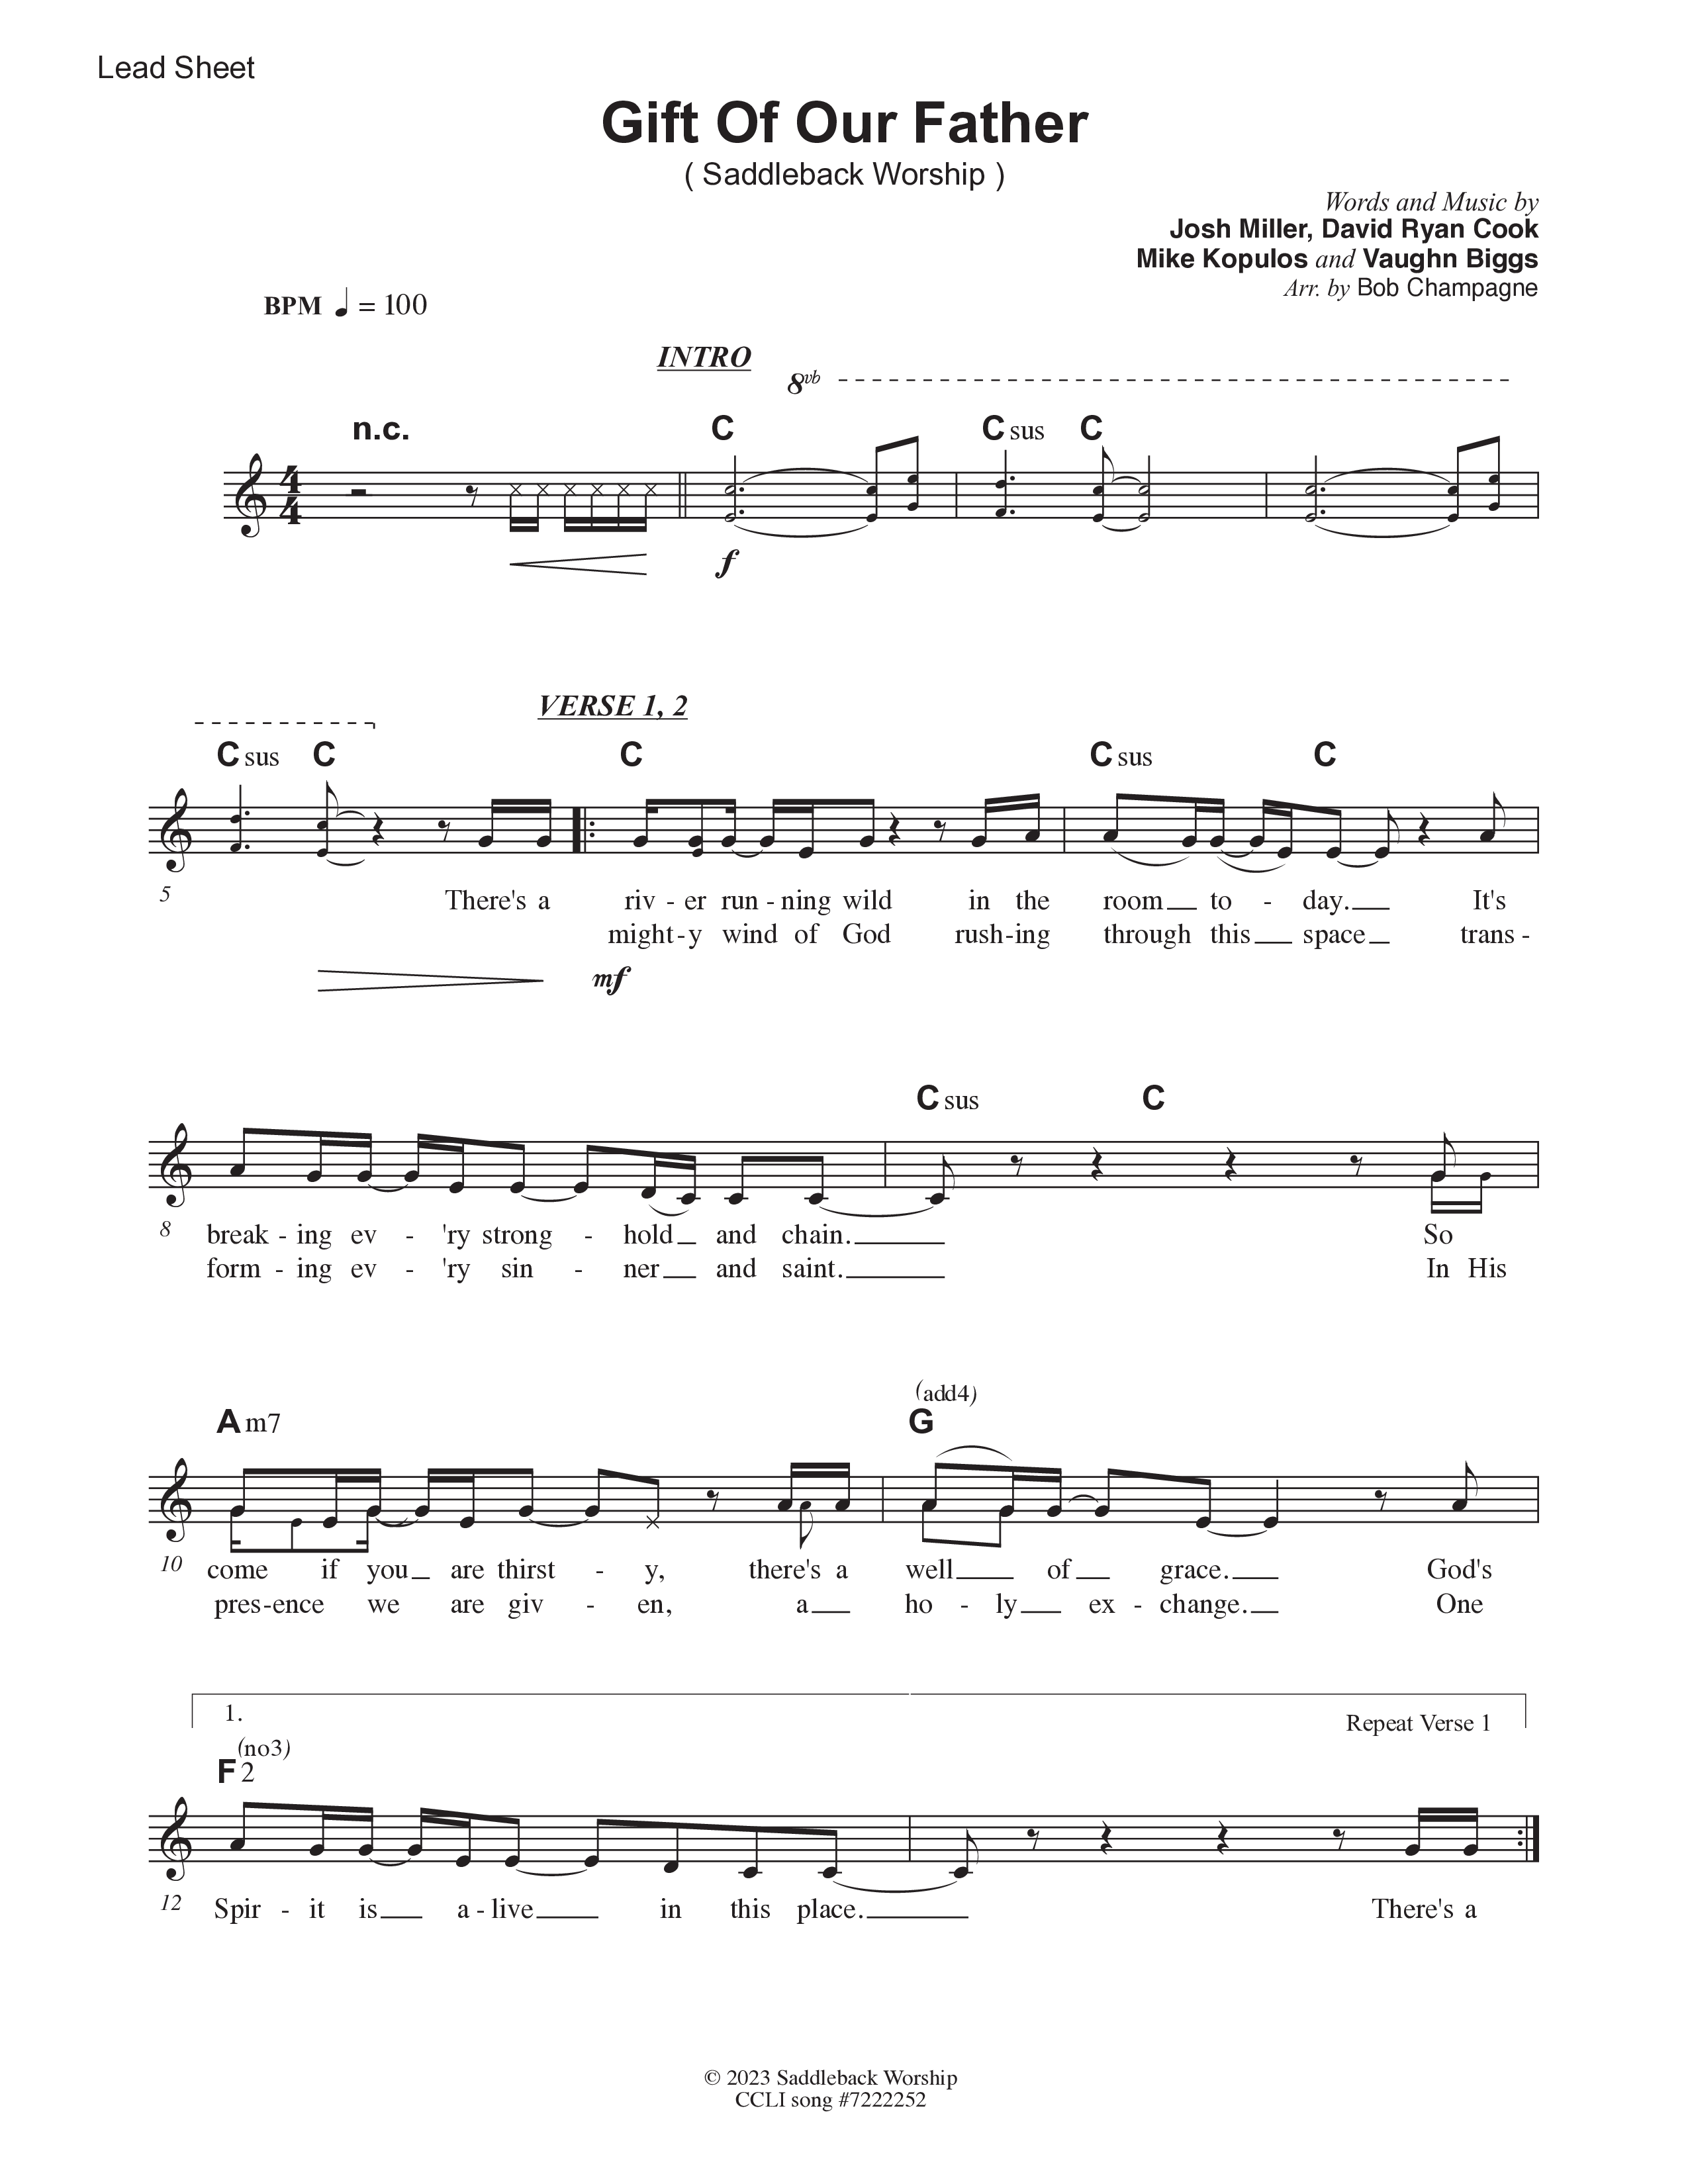 Gift Of Our Father (Live) Lead Sheet Melody (Saddleback Worship)